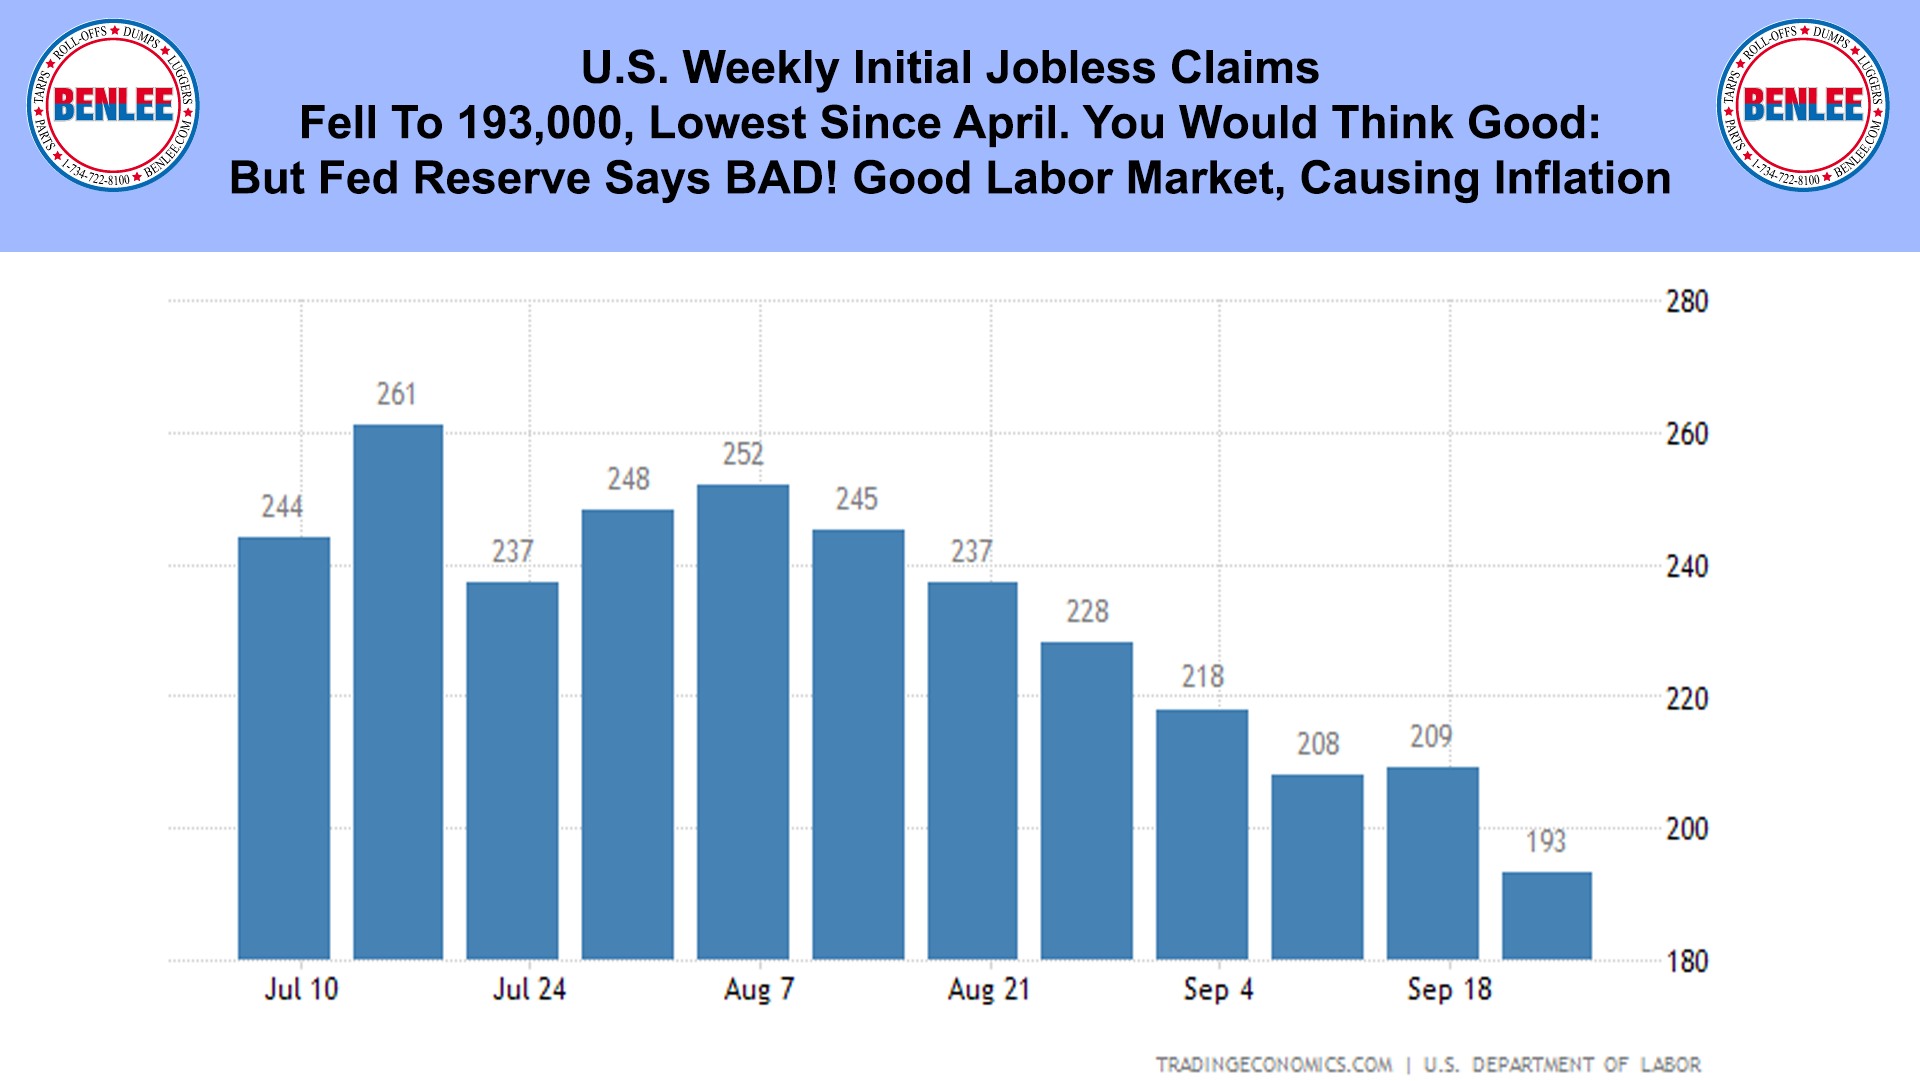 U.S. Weekly Initial Jobless Claims